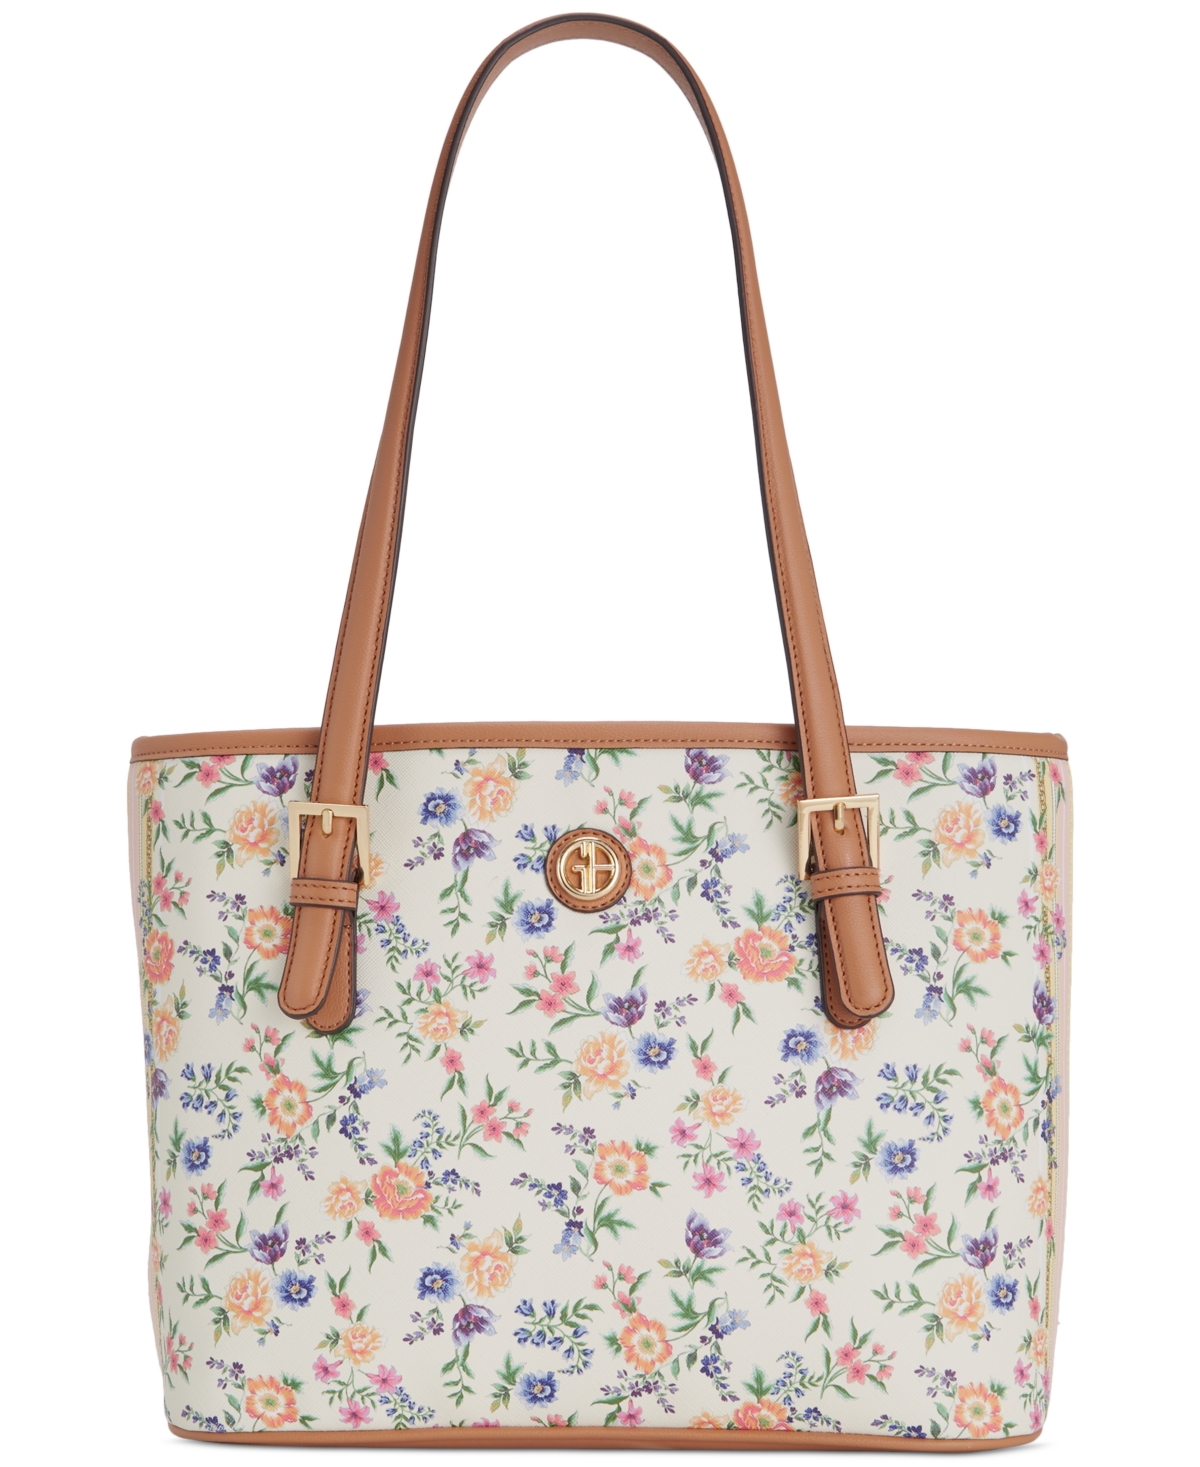 Giani Bernini Saffiano Pastel Floral Large Tote, Created For Macy's In Floral Multi